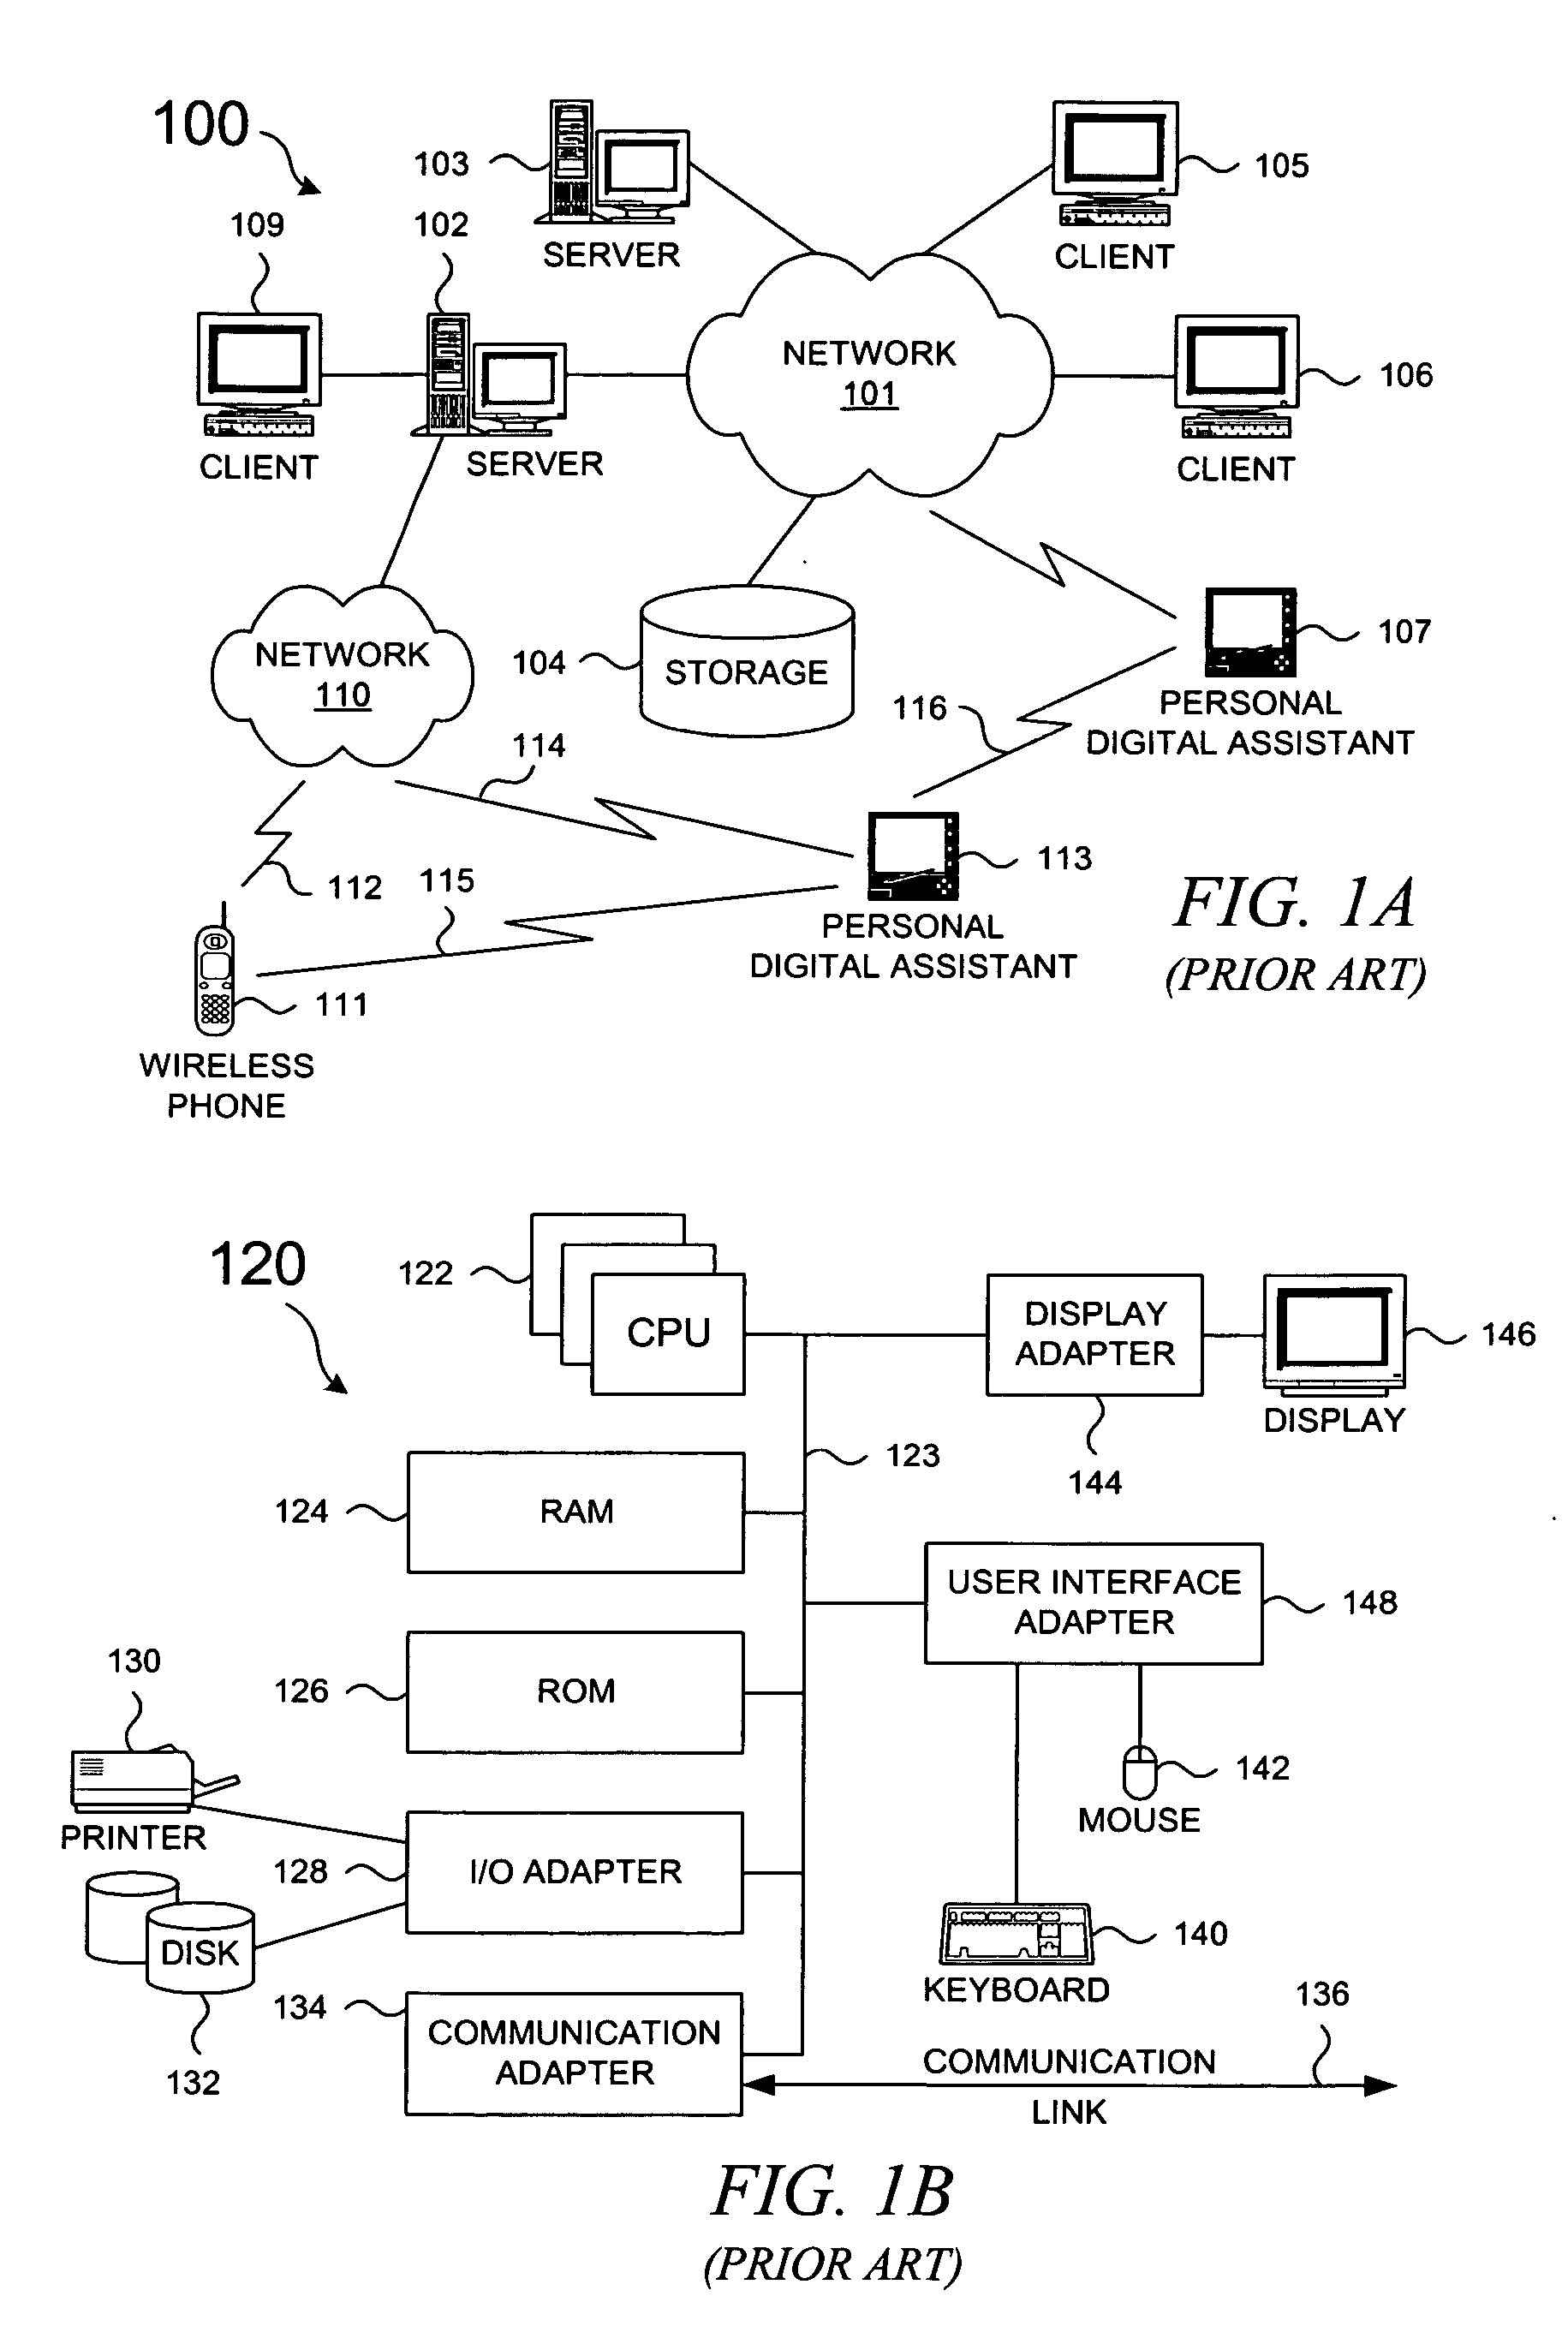 Method and system for secure binding register name identifier profile